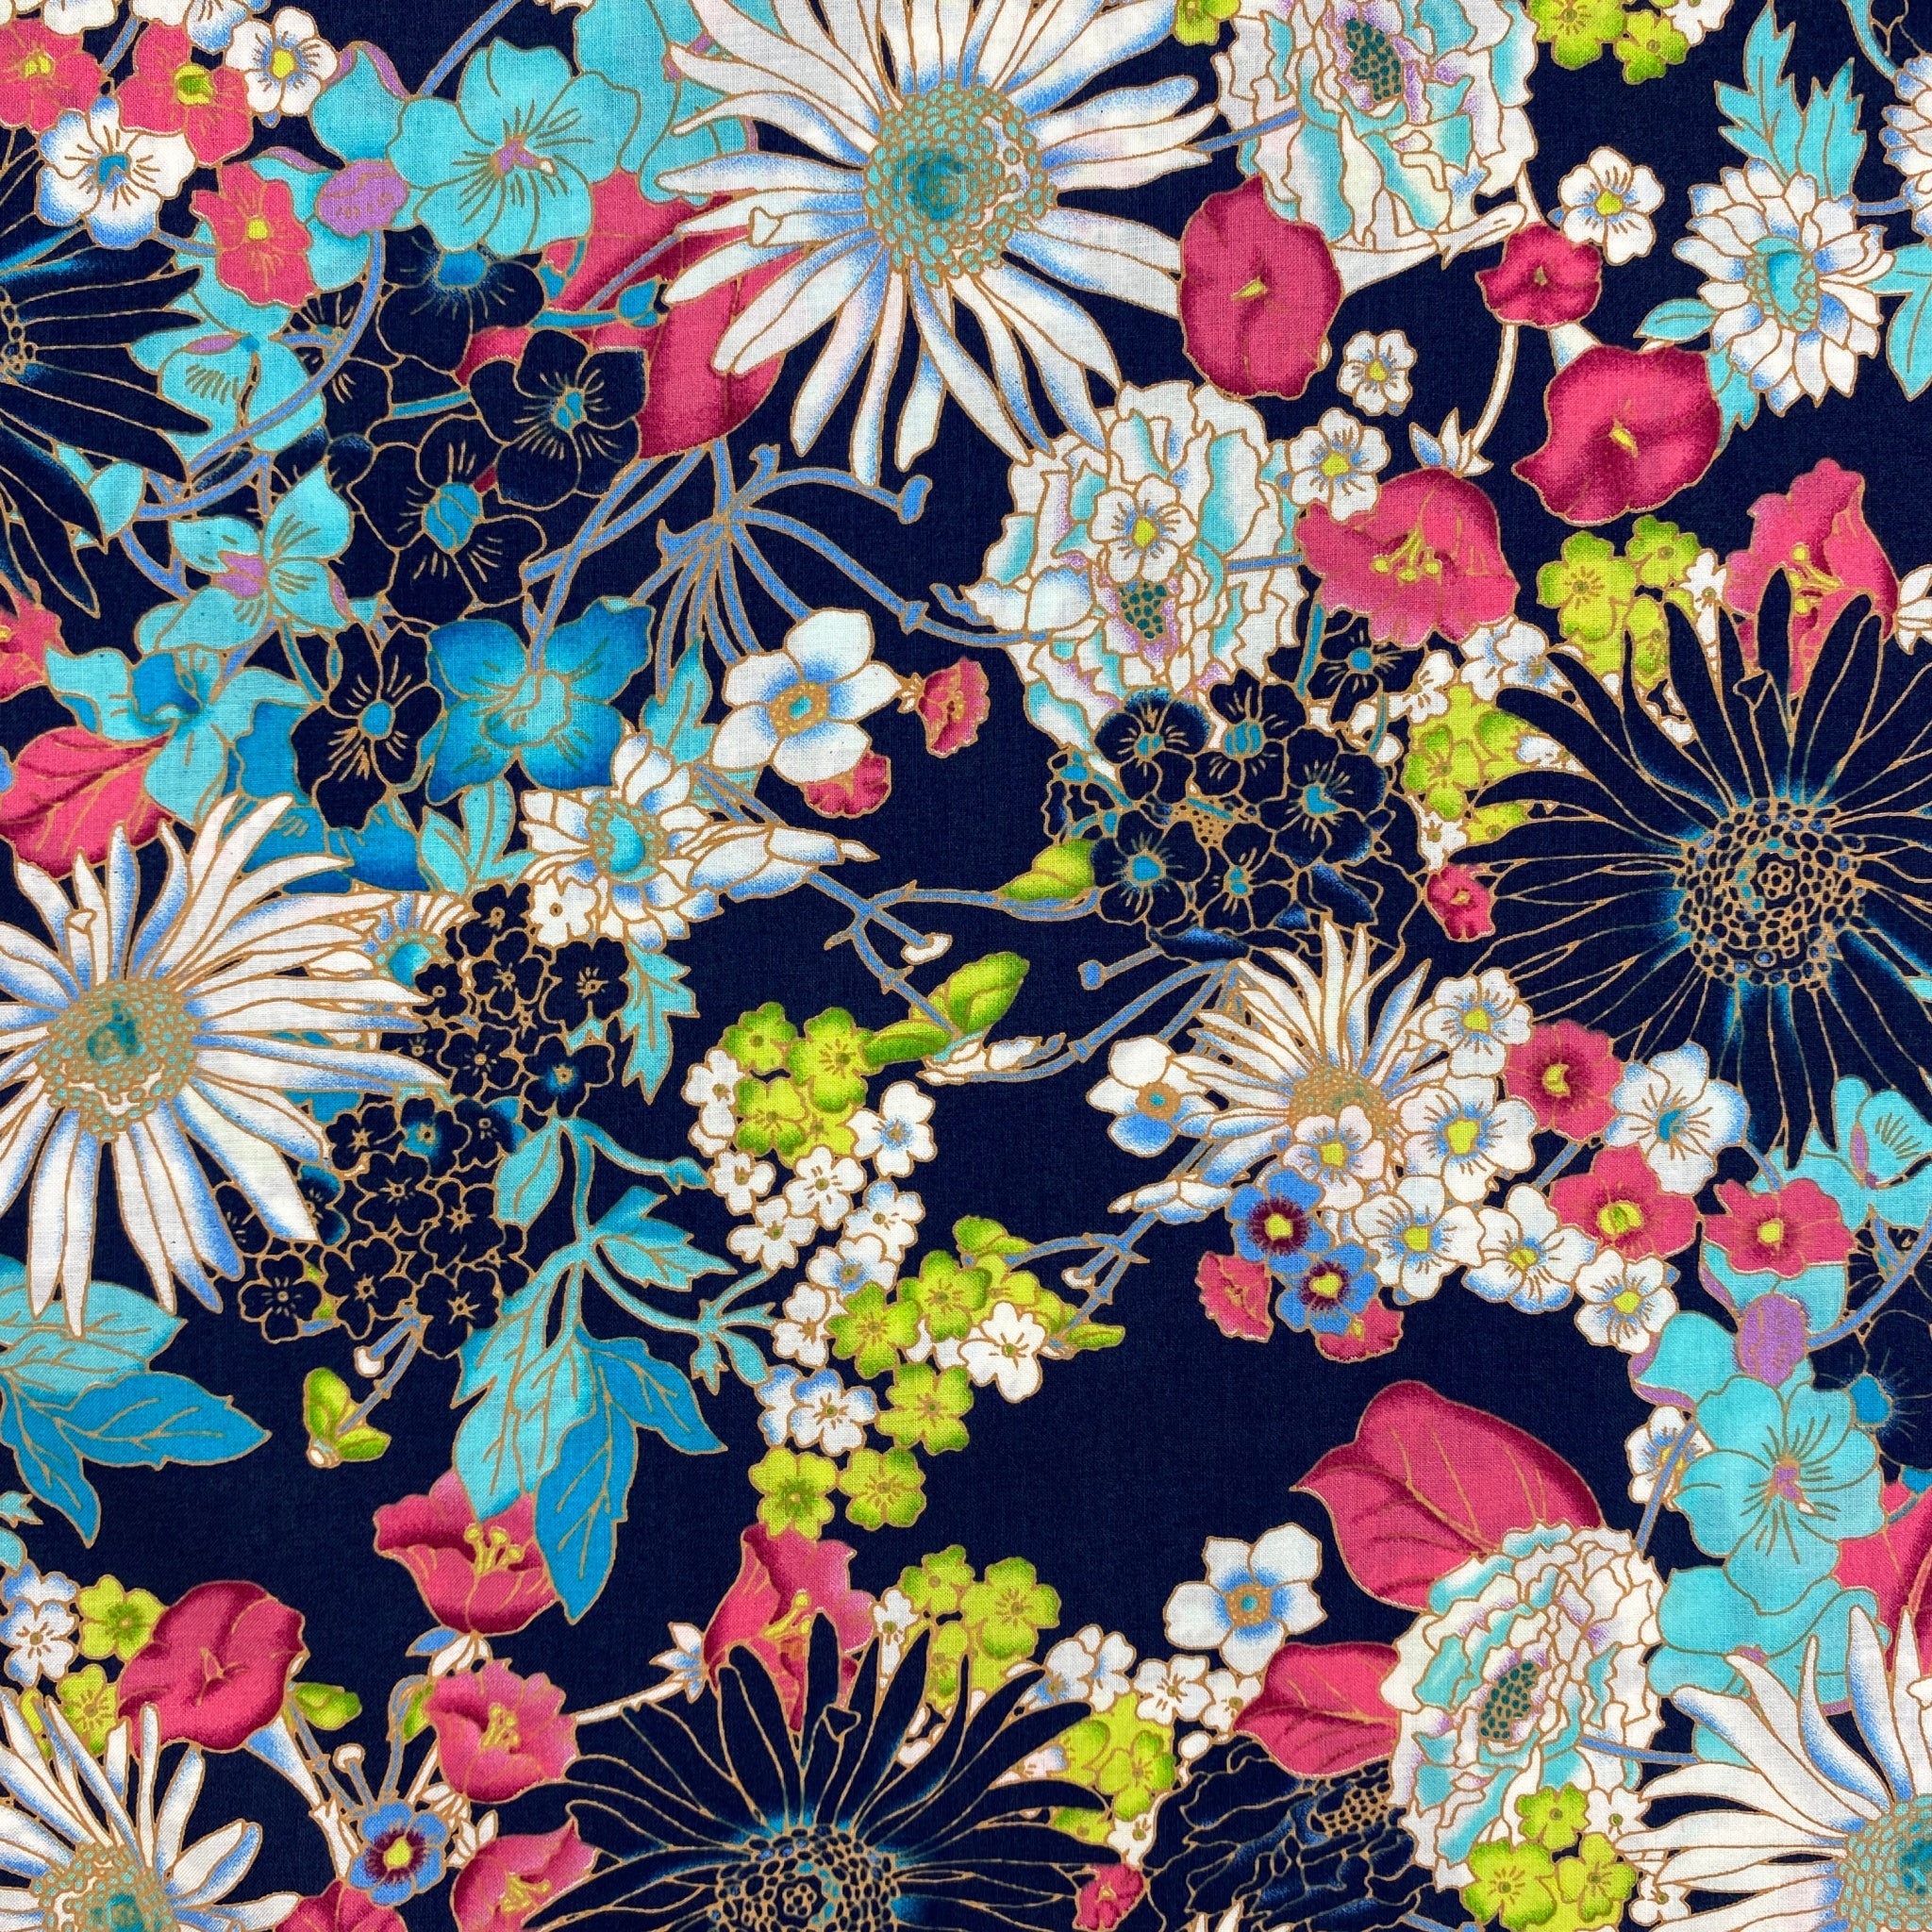 dressmaking fabric, cotton lawn, dark blue background, variety of flowers in barbie pink, apple green, sea blue, white, flowers outlined in a none shine gold. image is displayed flat.